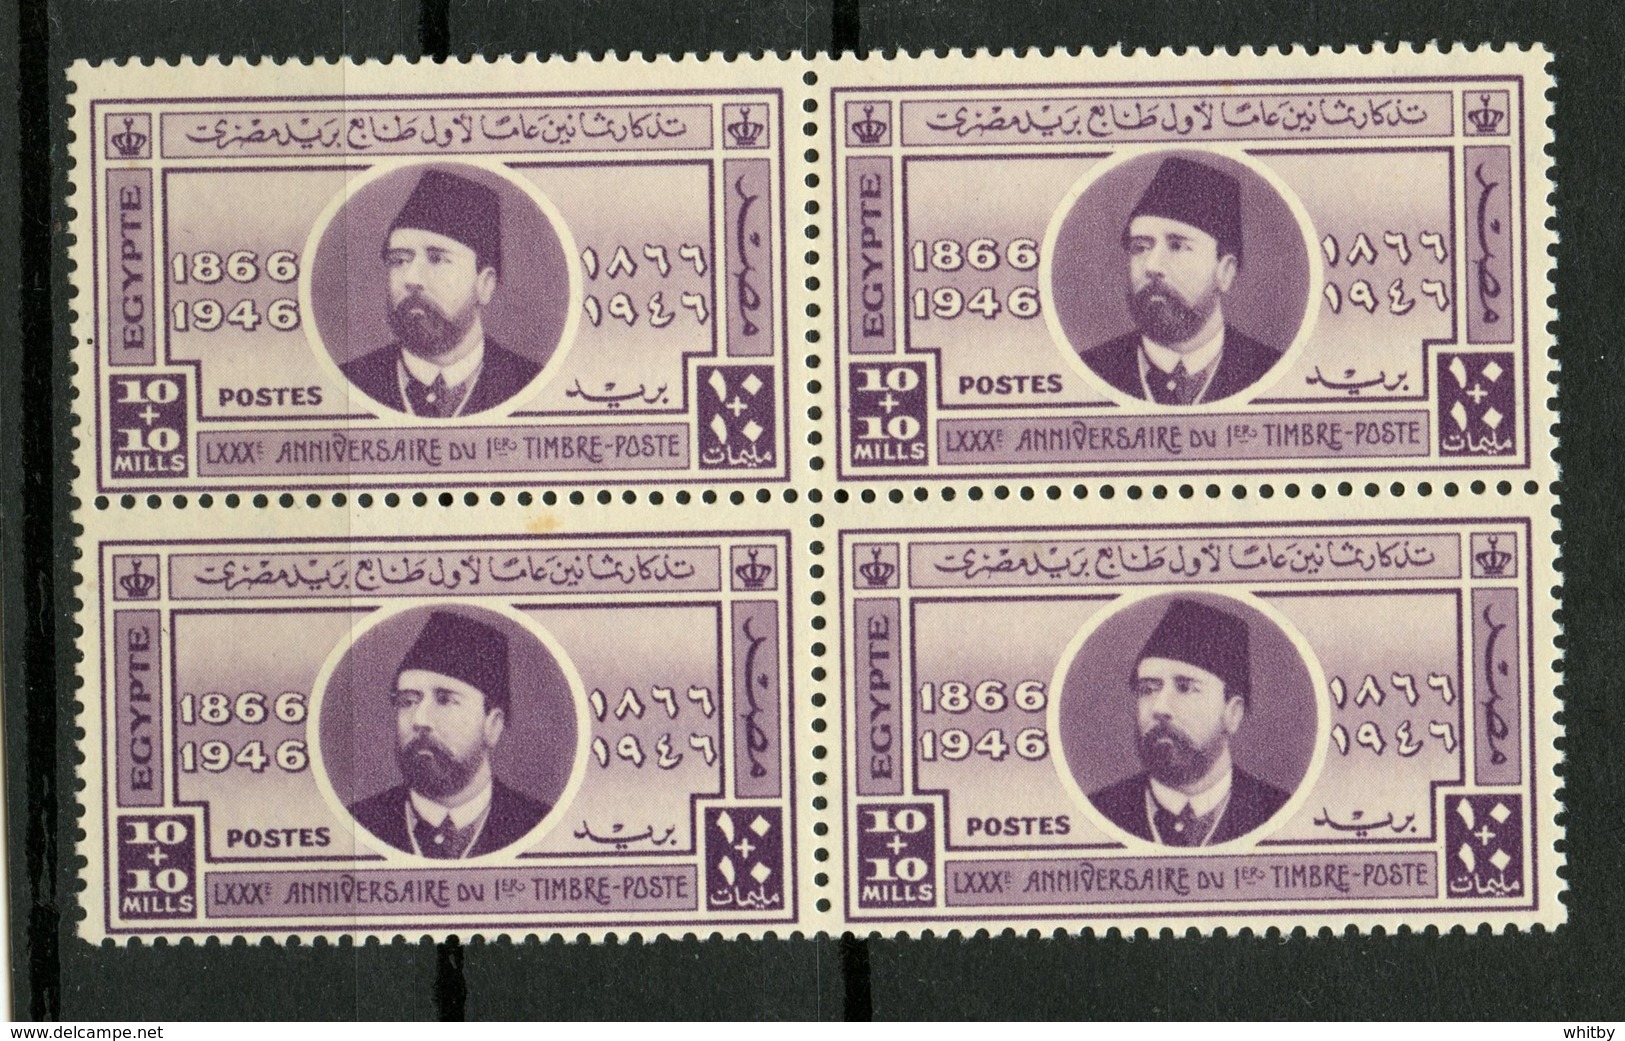 Egypt 1946 10 + 10m First Postage Stamp Issue #B4   MNH Block Of 4 - Unused Stamps